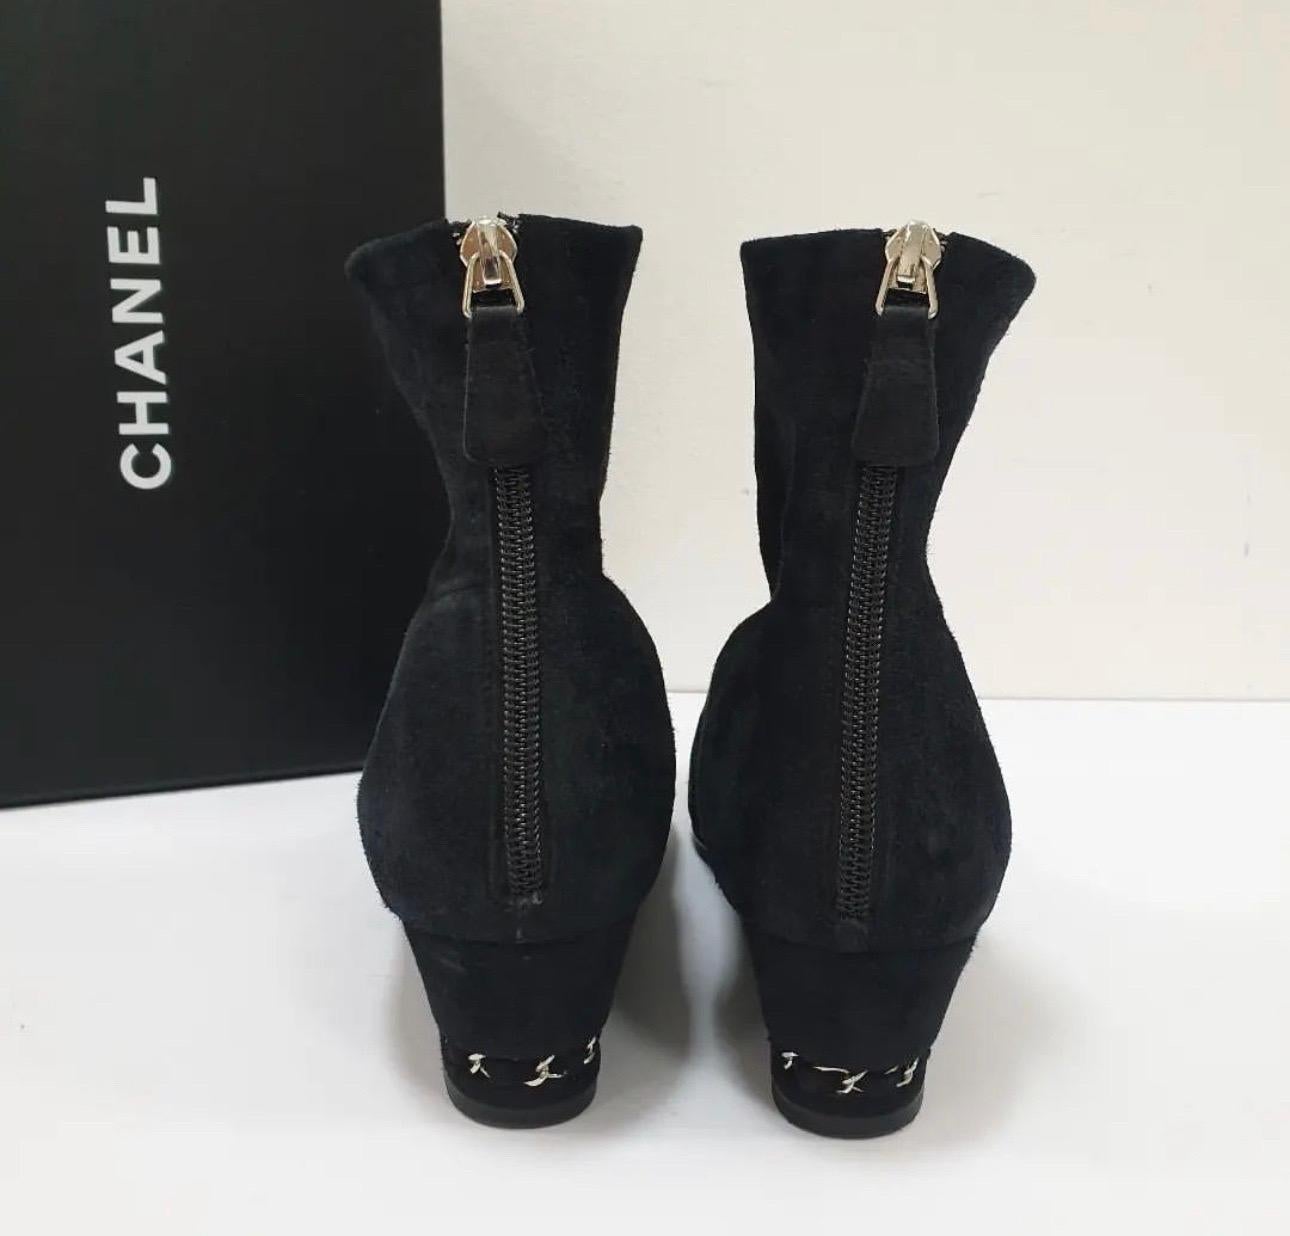 Women's Chanel Satin CC Toe Black Suede Chain Wedge Booties